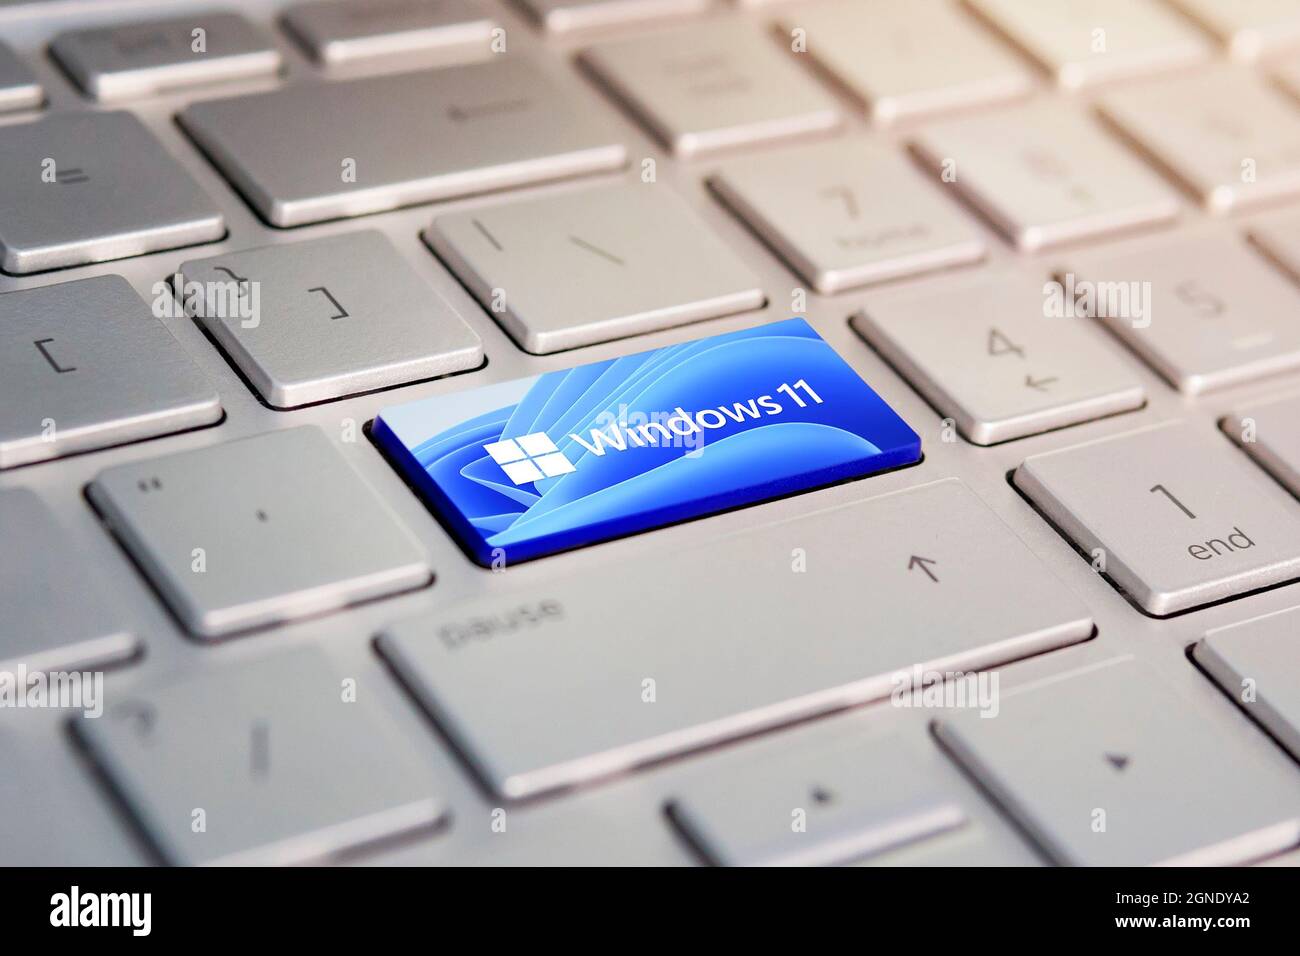 June 23, 2021. Barnaul, Russia. button with the logo Windows 11 on the grey keyboard of a modern laptop. Stock Photo